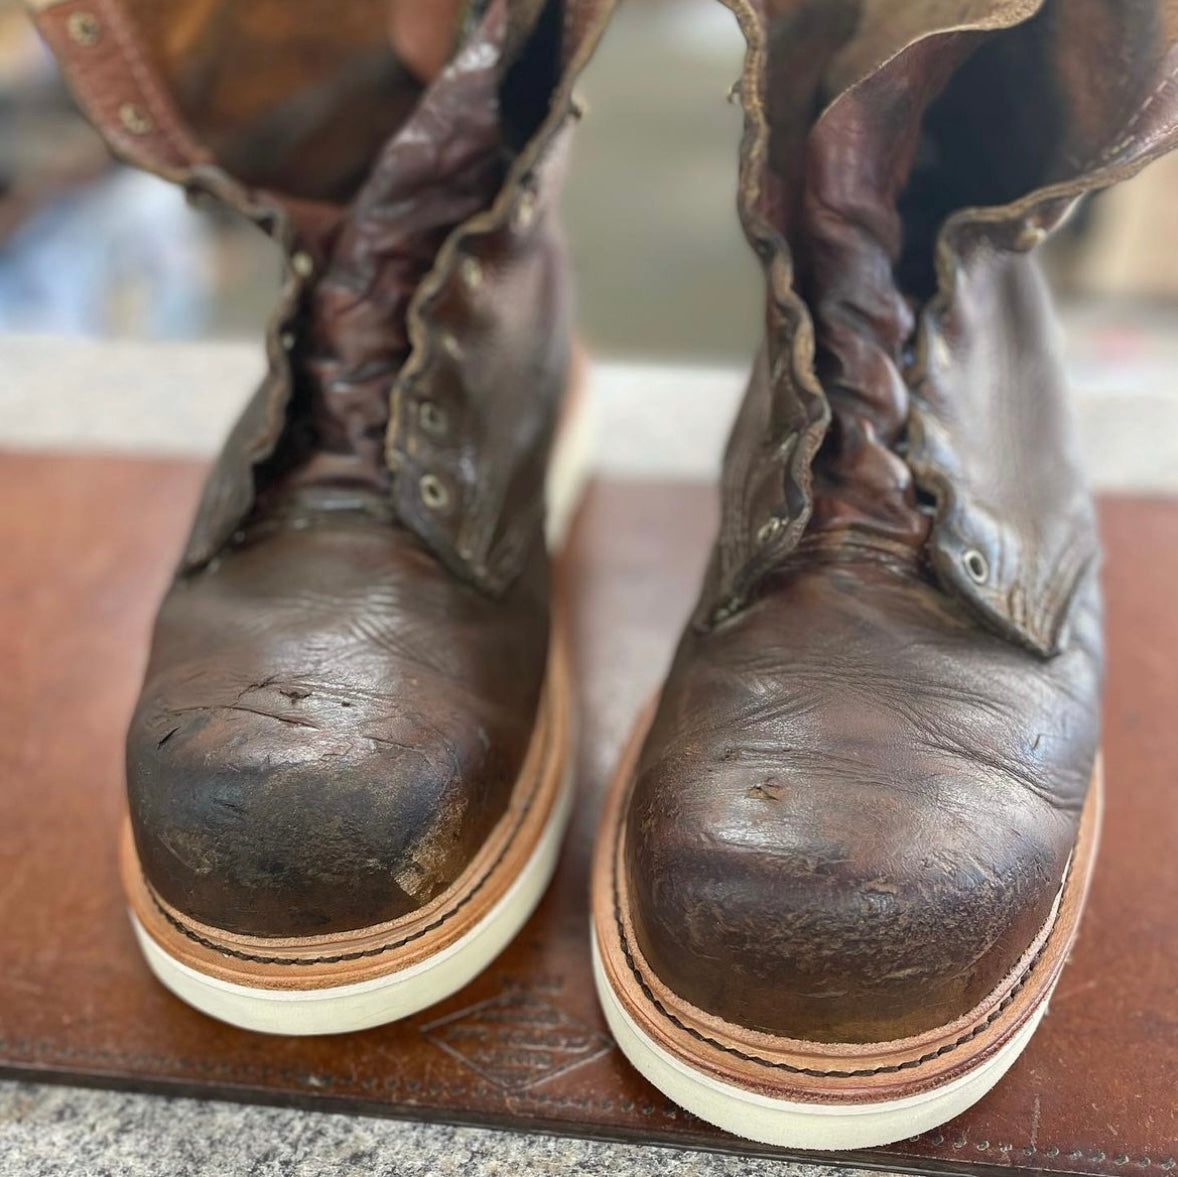 Thorogood™ Boots Resole Package